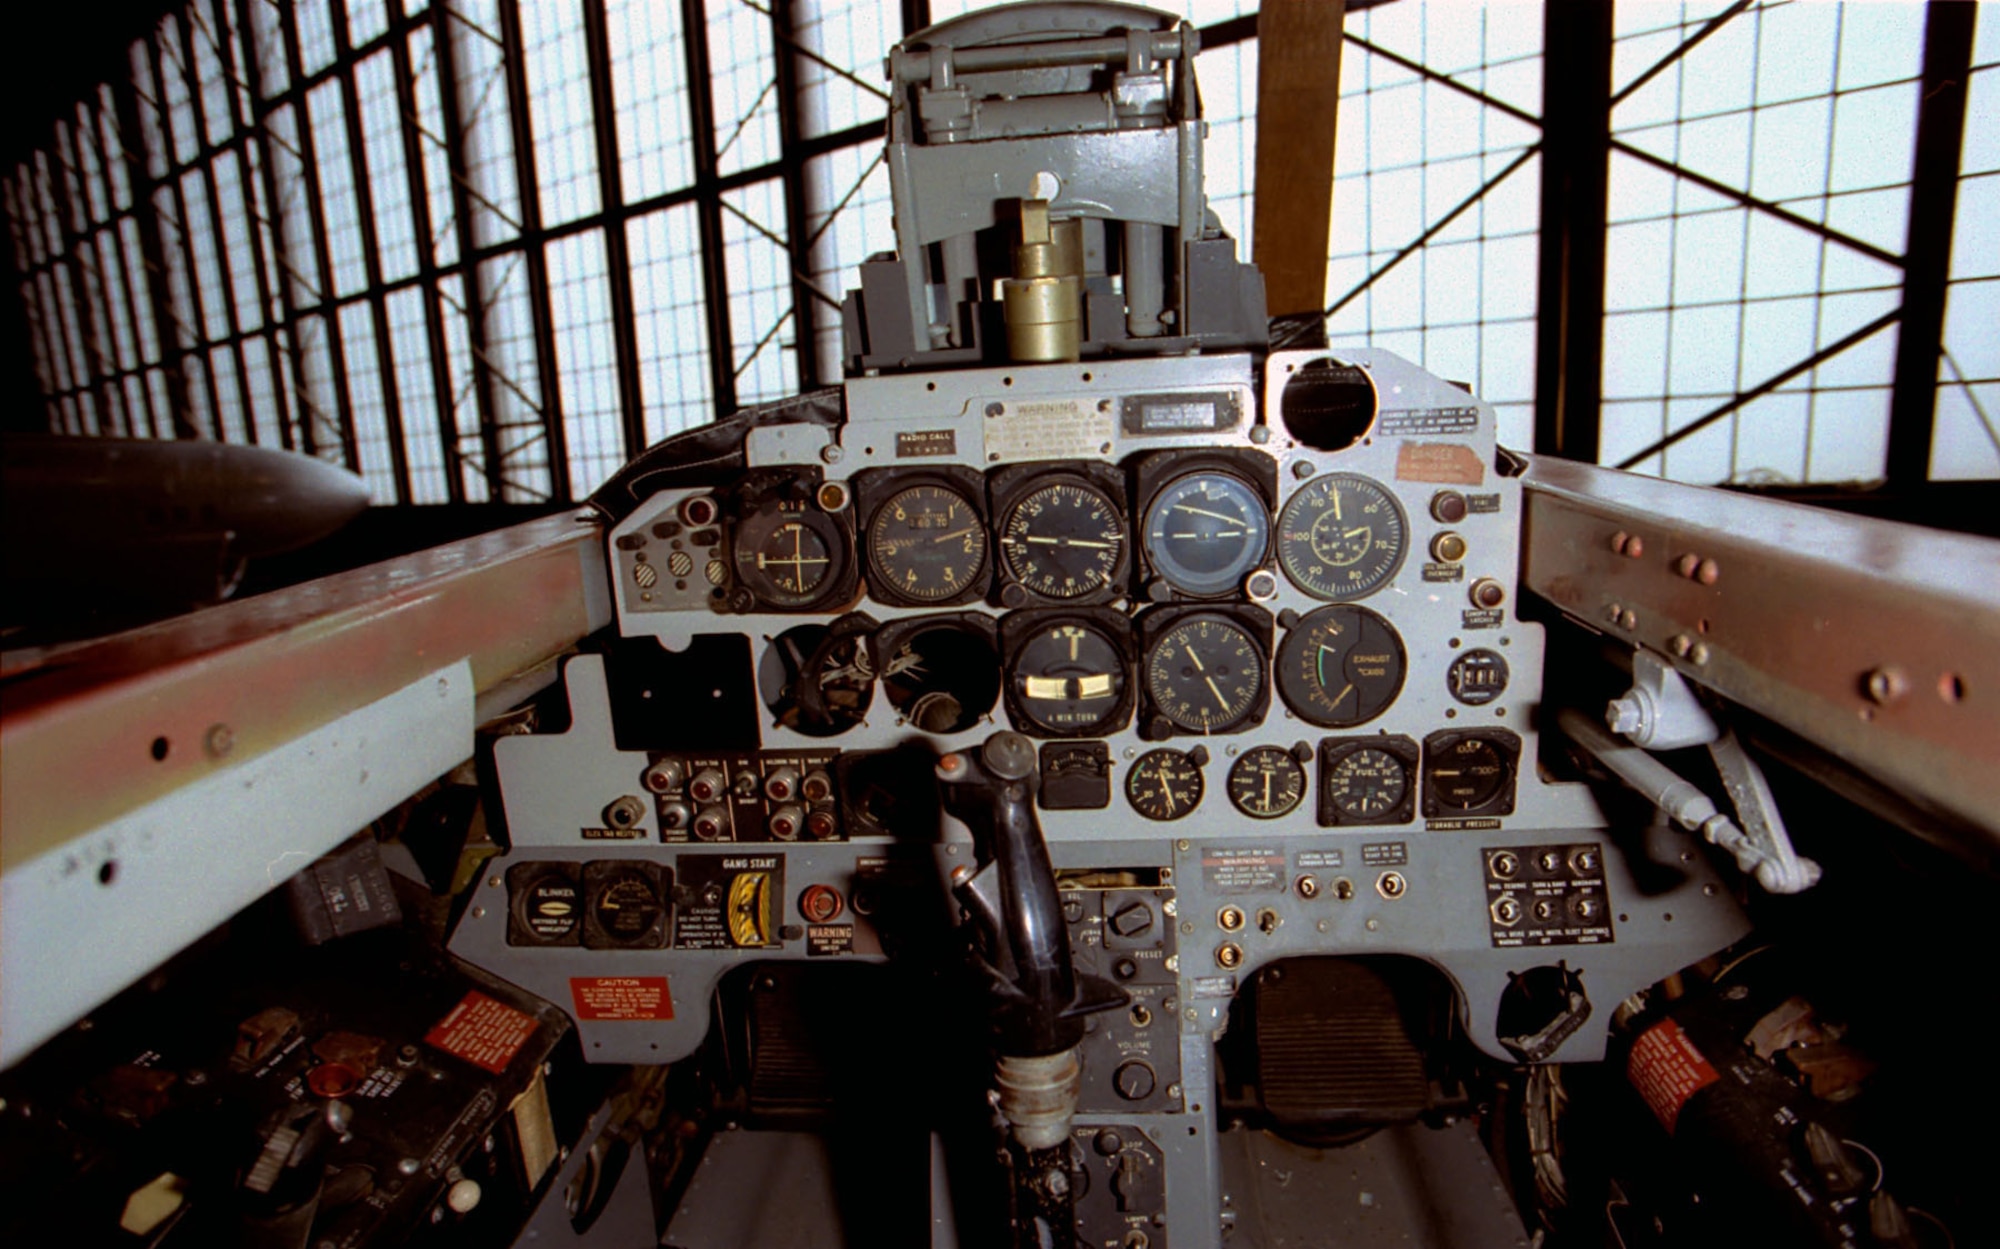 DAYTON, Ohio -- Lockheed T-33A rear cockpit at the National Museum of the United States Air Force. (U.S. Air Force photo)